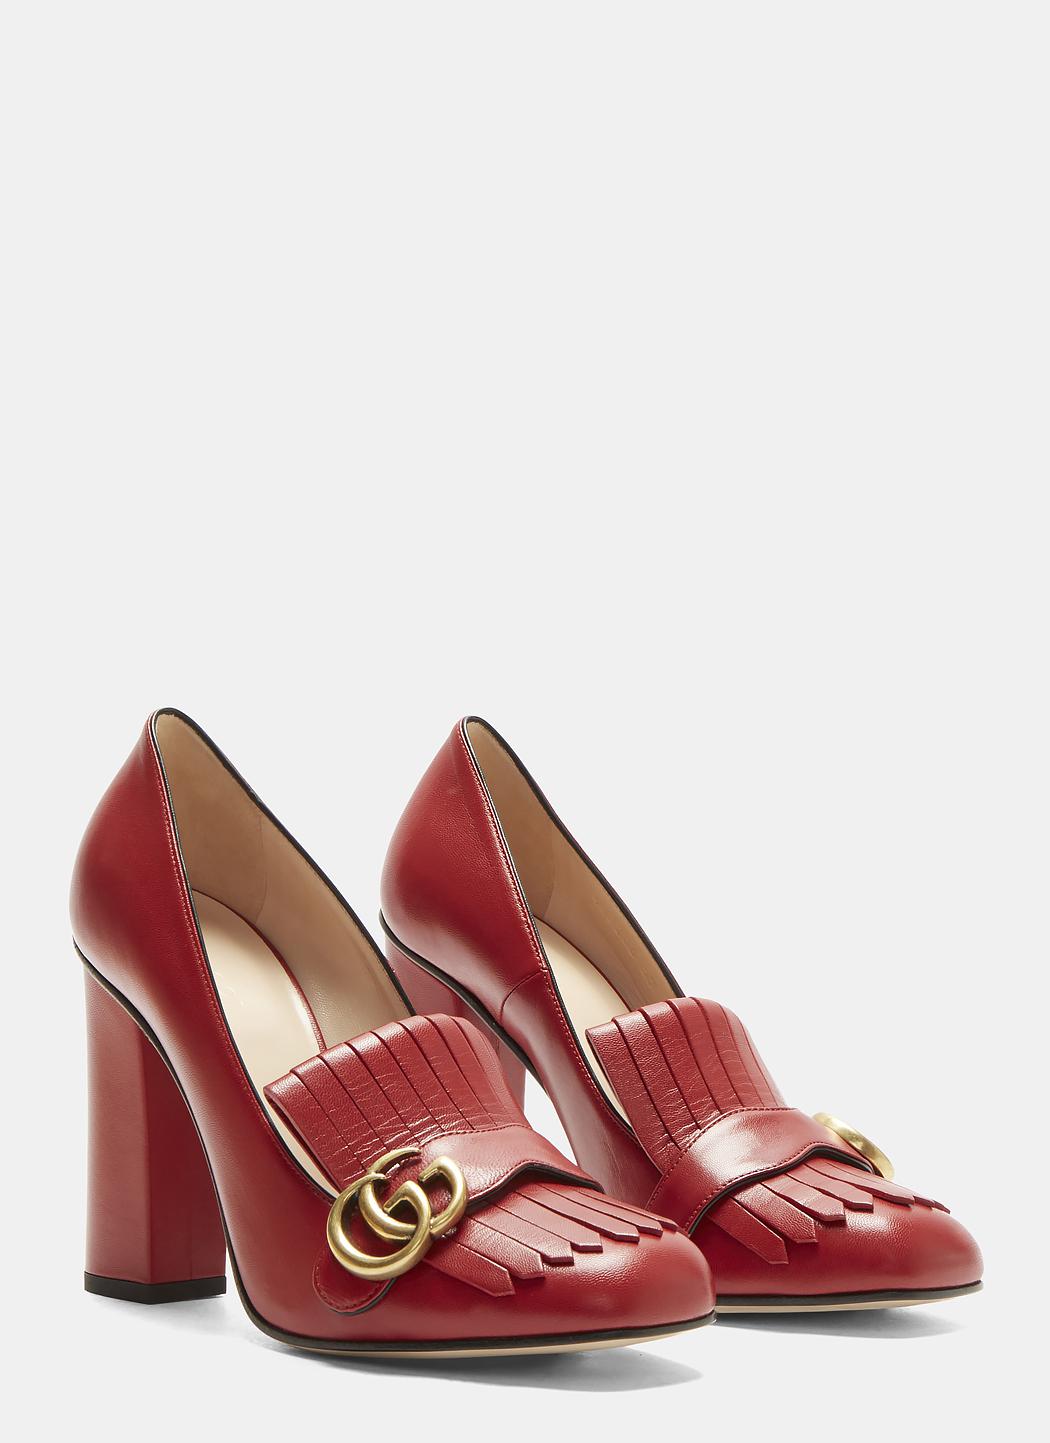 Gucci Leather GG High-heel Fringed 